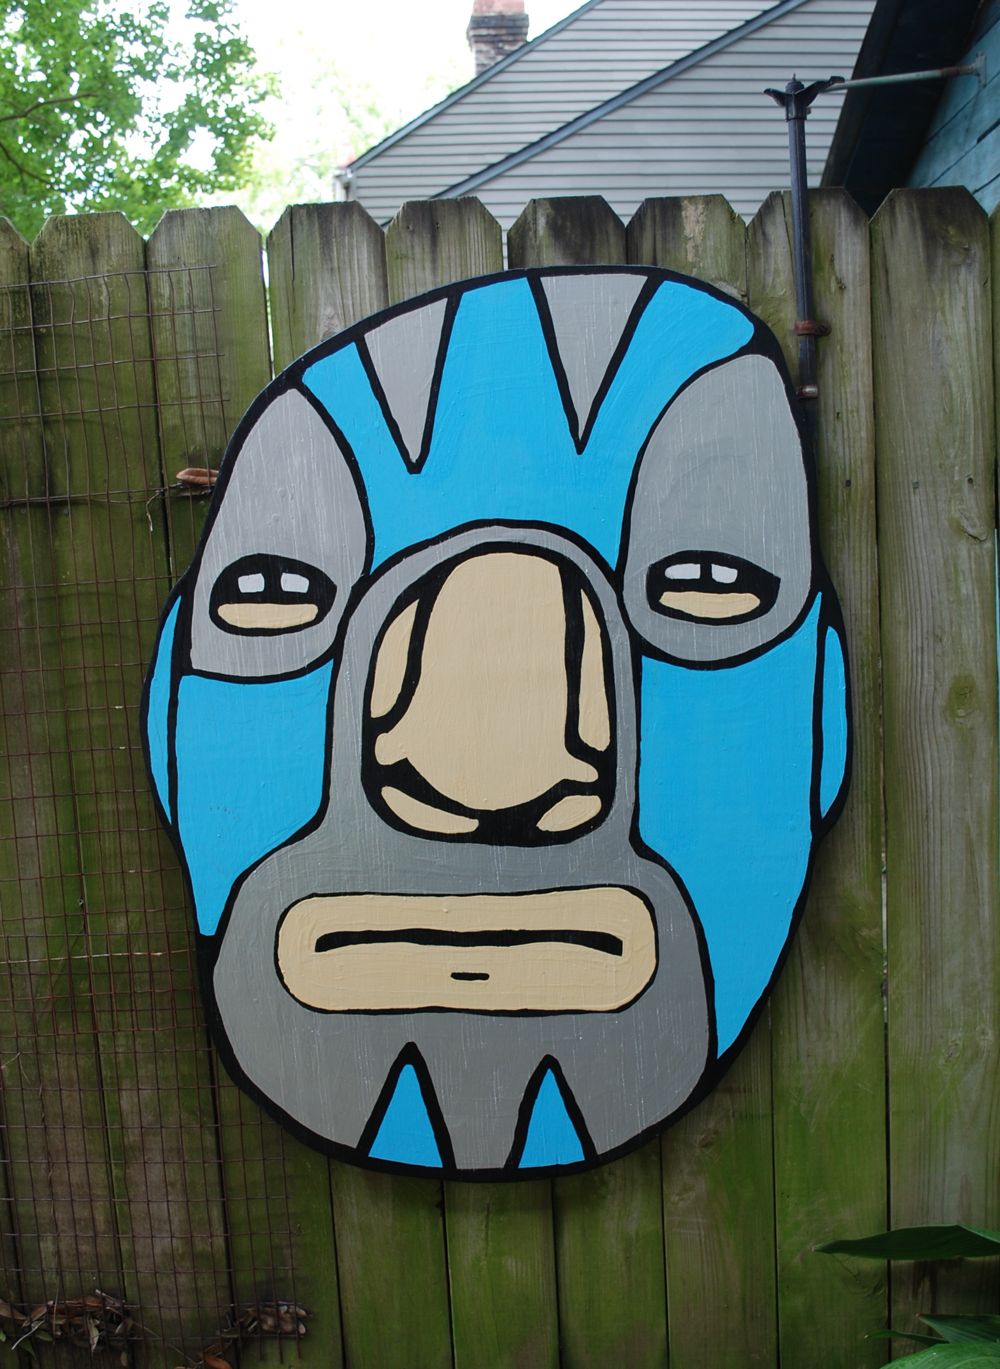 blue luchadr painting by David Rhoden, August 18, 2014.